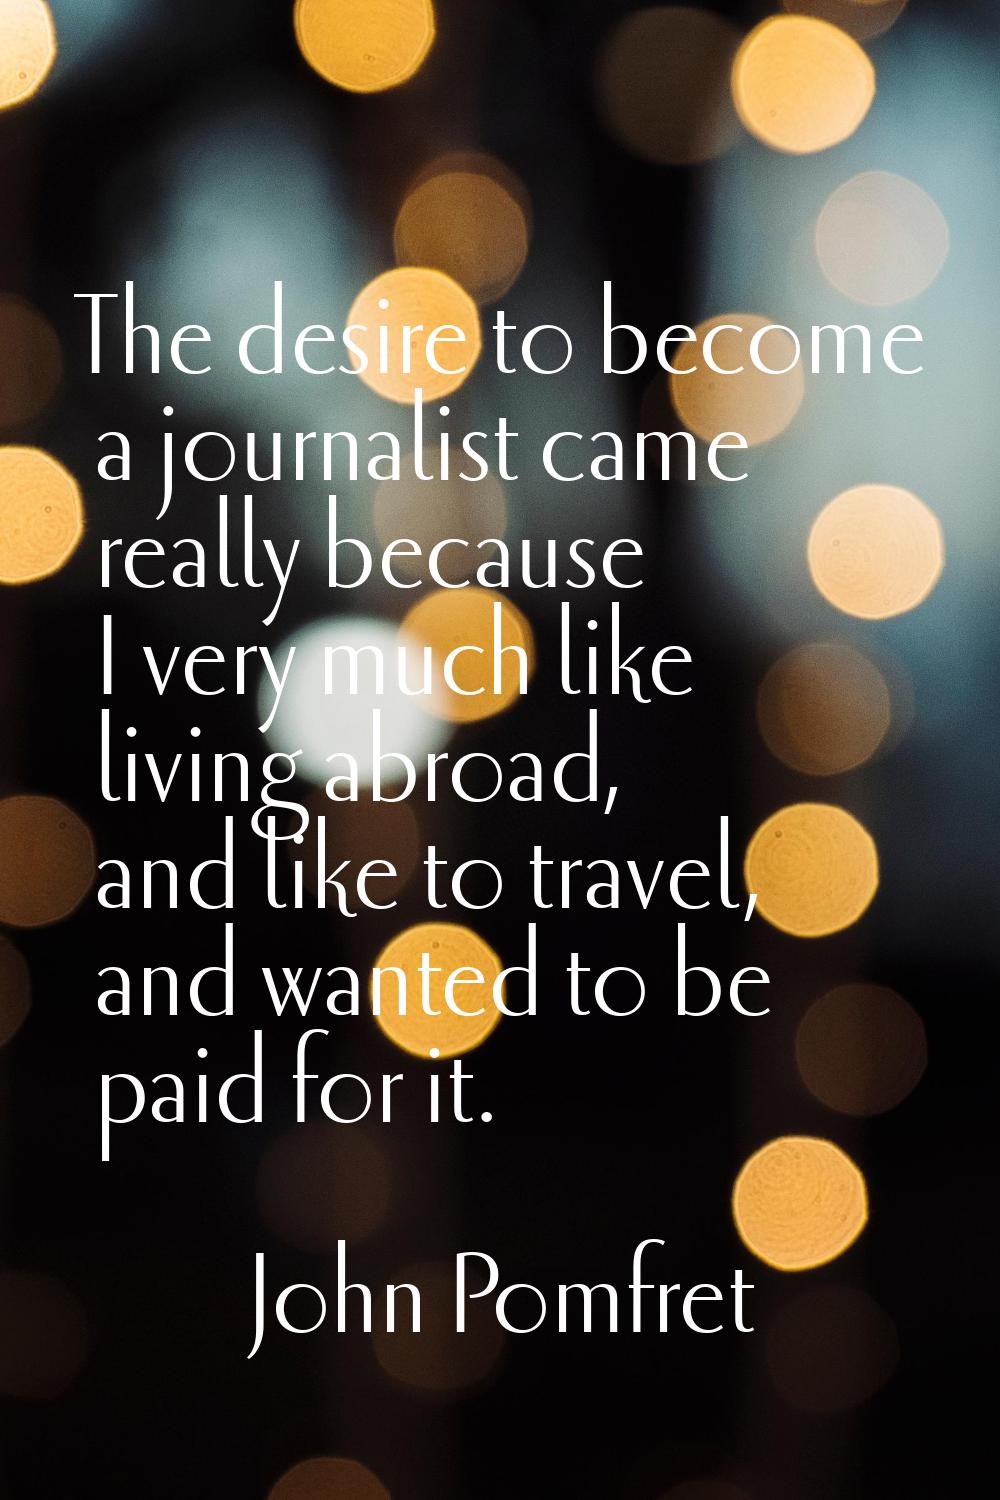 The desire to become a journalist came really because I very much like living abroad, and like to t